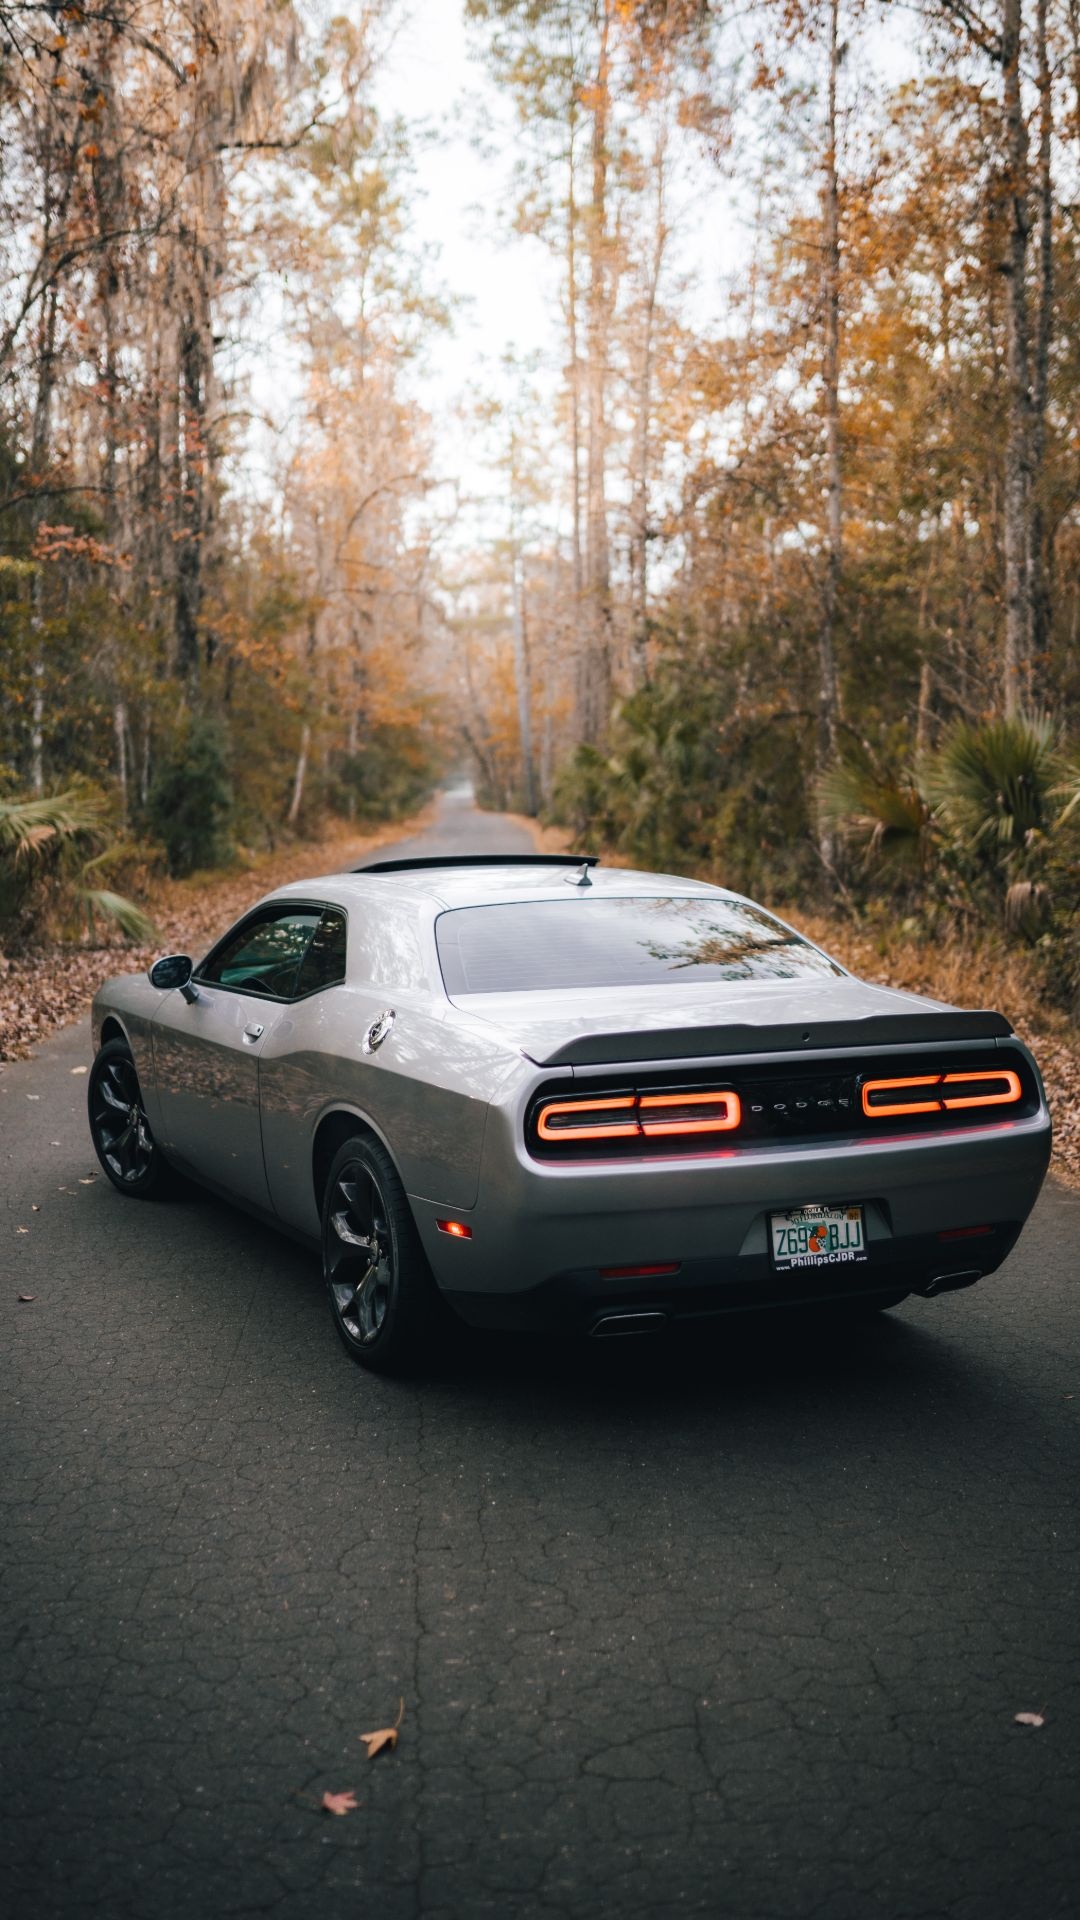 Dodge Challenger wallpapers, Best backgrounds, Download, 1080x1920 Full HD Phone